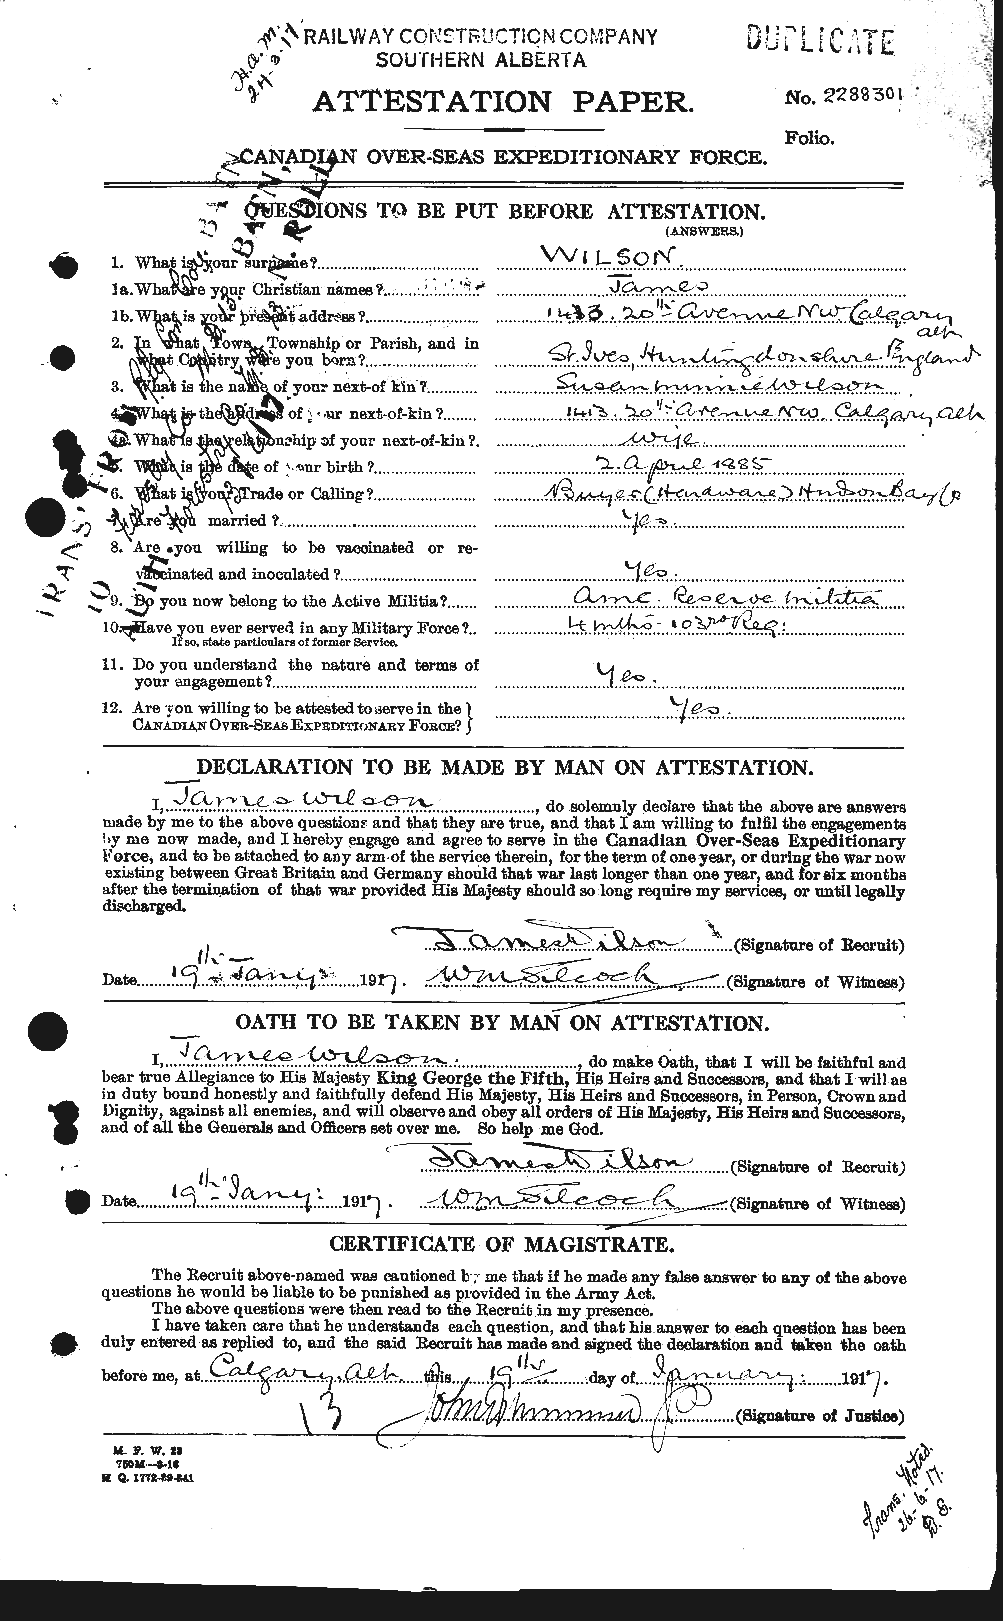 Personnel Records of the First World War - CEF 681337a